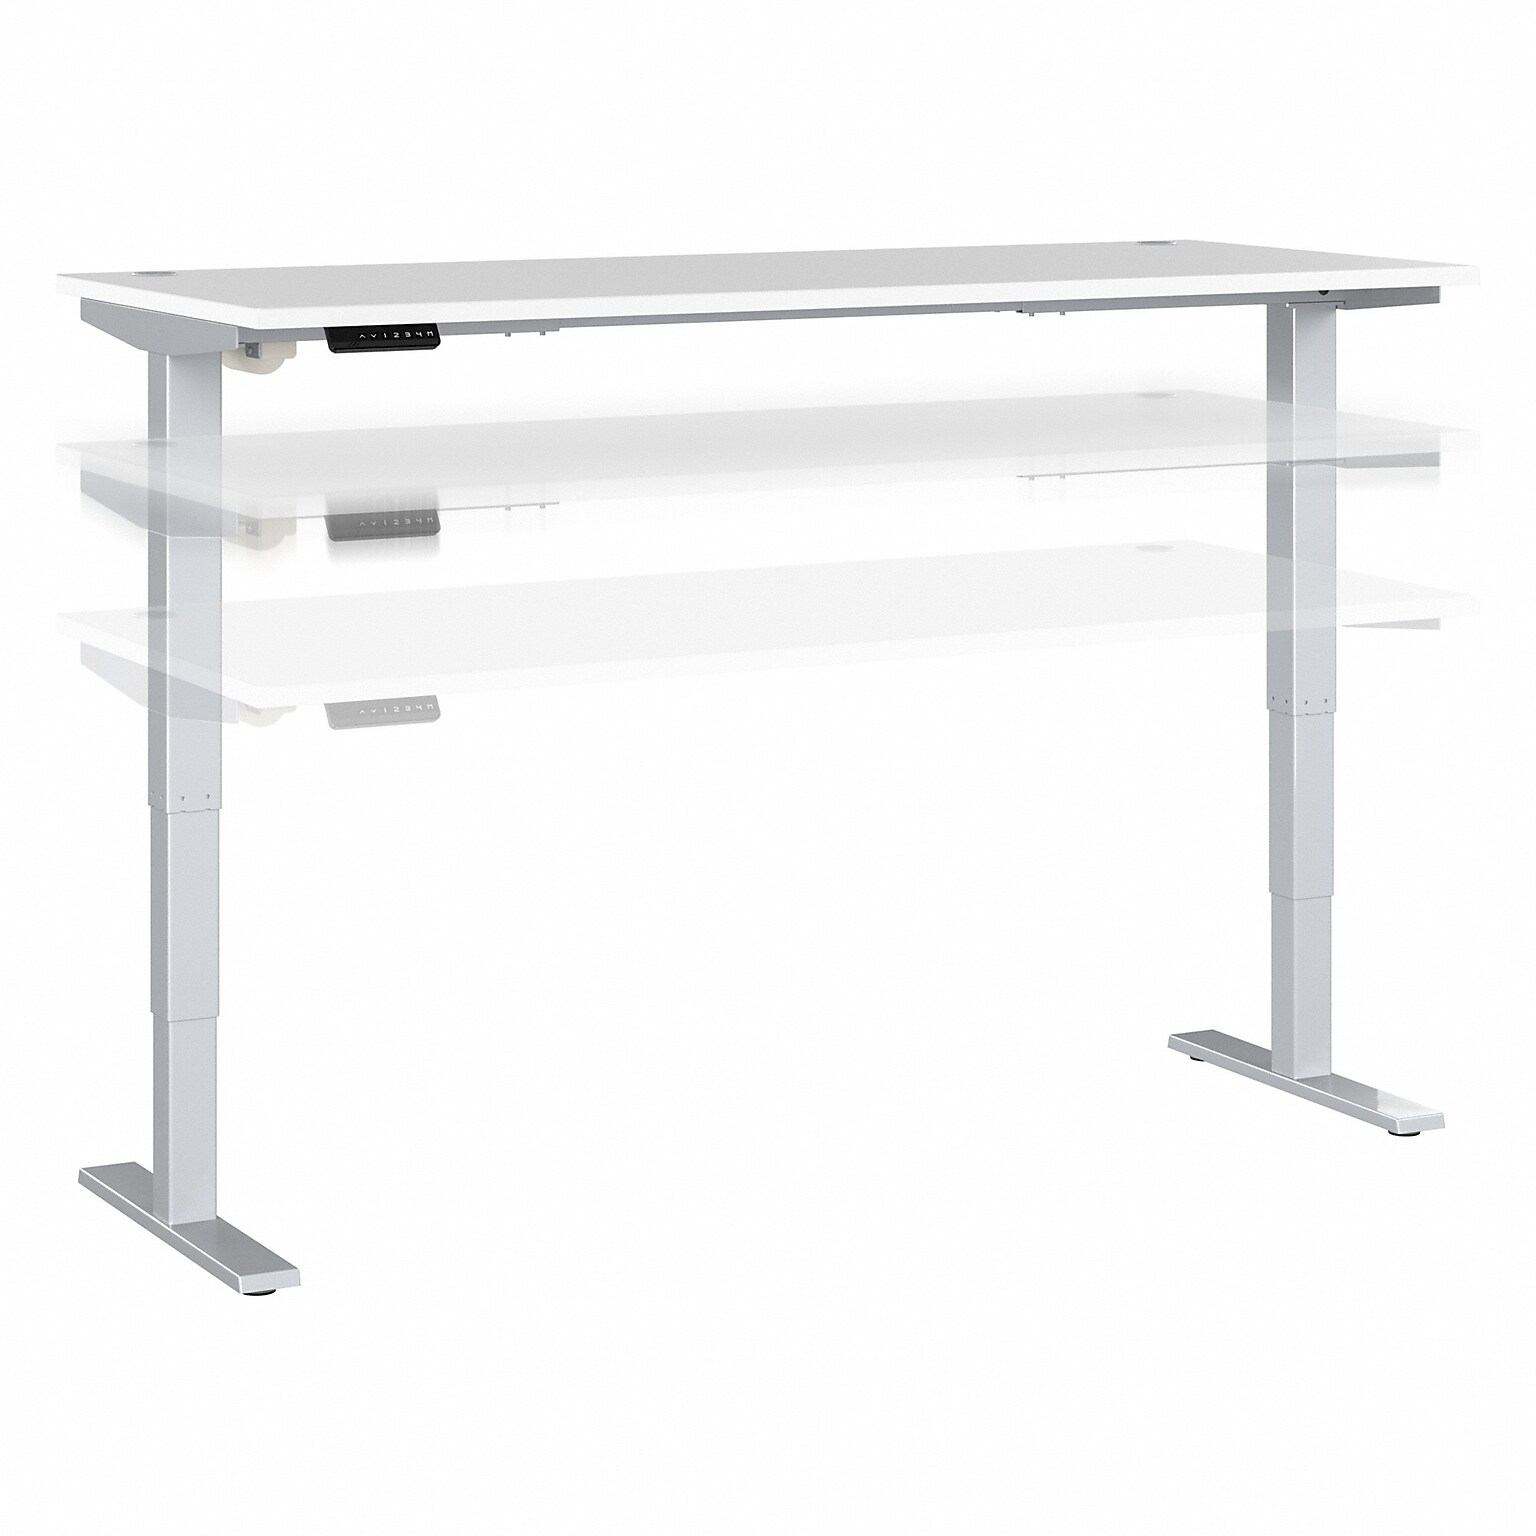 Bush Business Furniture Move 40 Series 72W Electric Height Adjustable Standing Desk, White/Cool Gray Metallic (M4S7230WHSK)